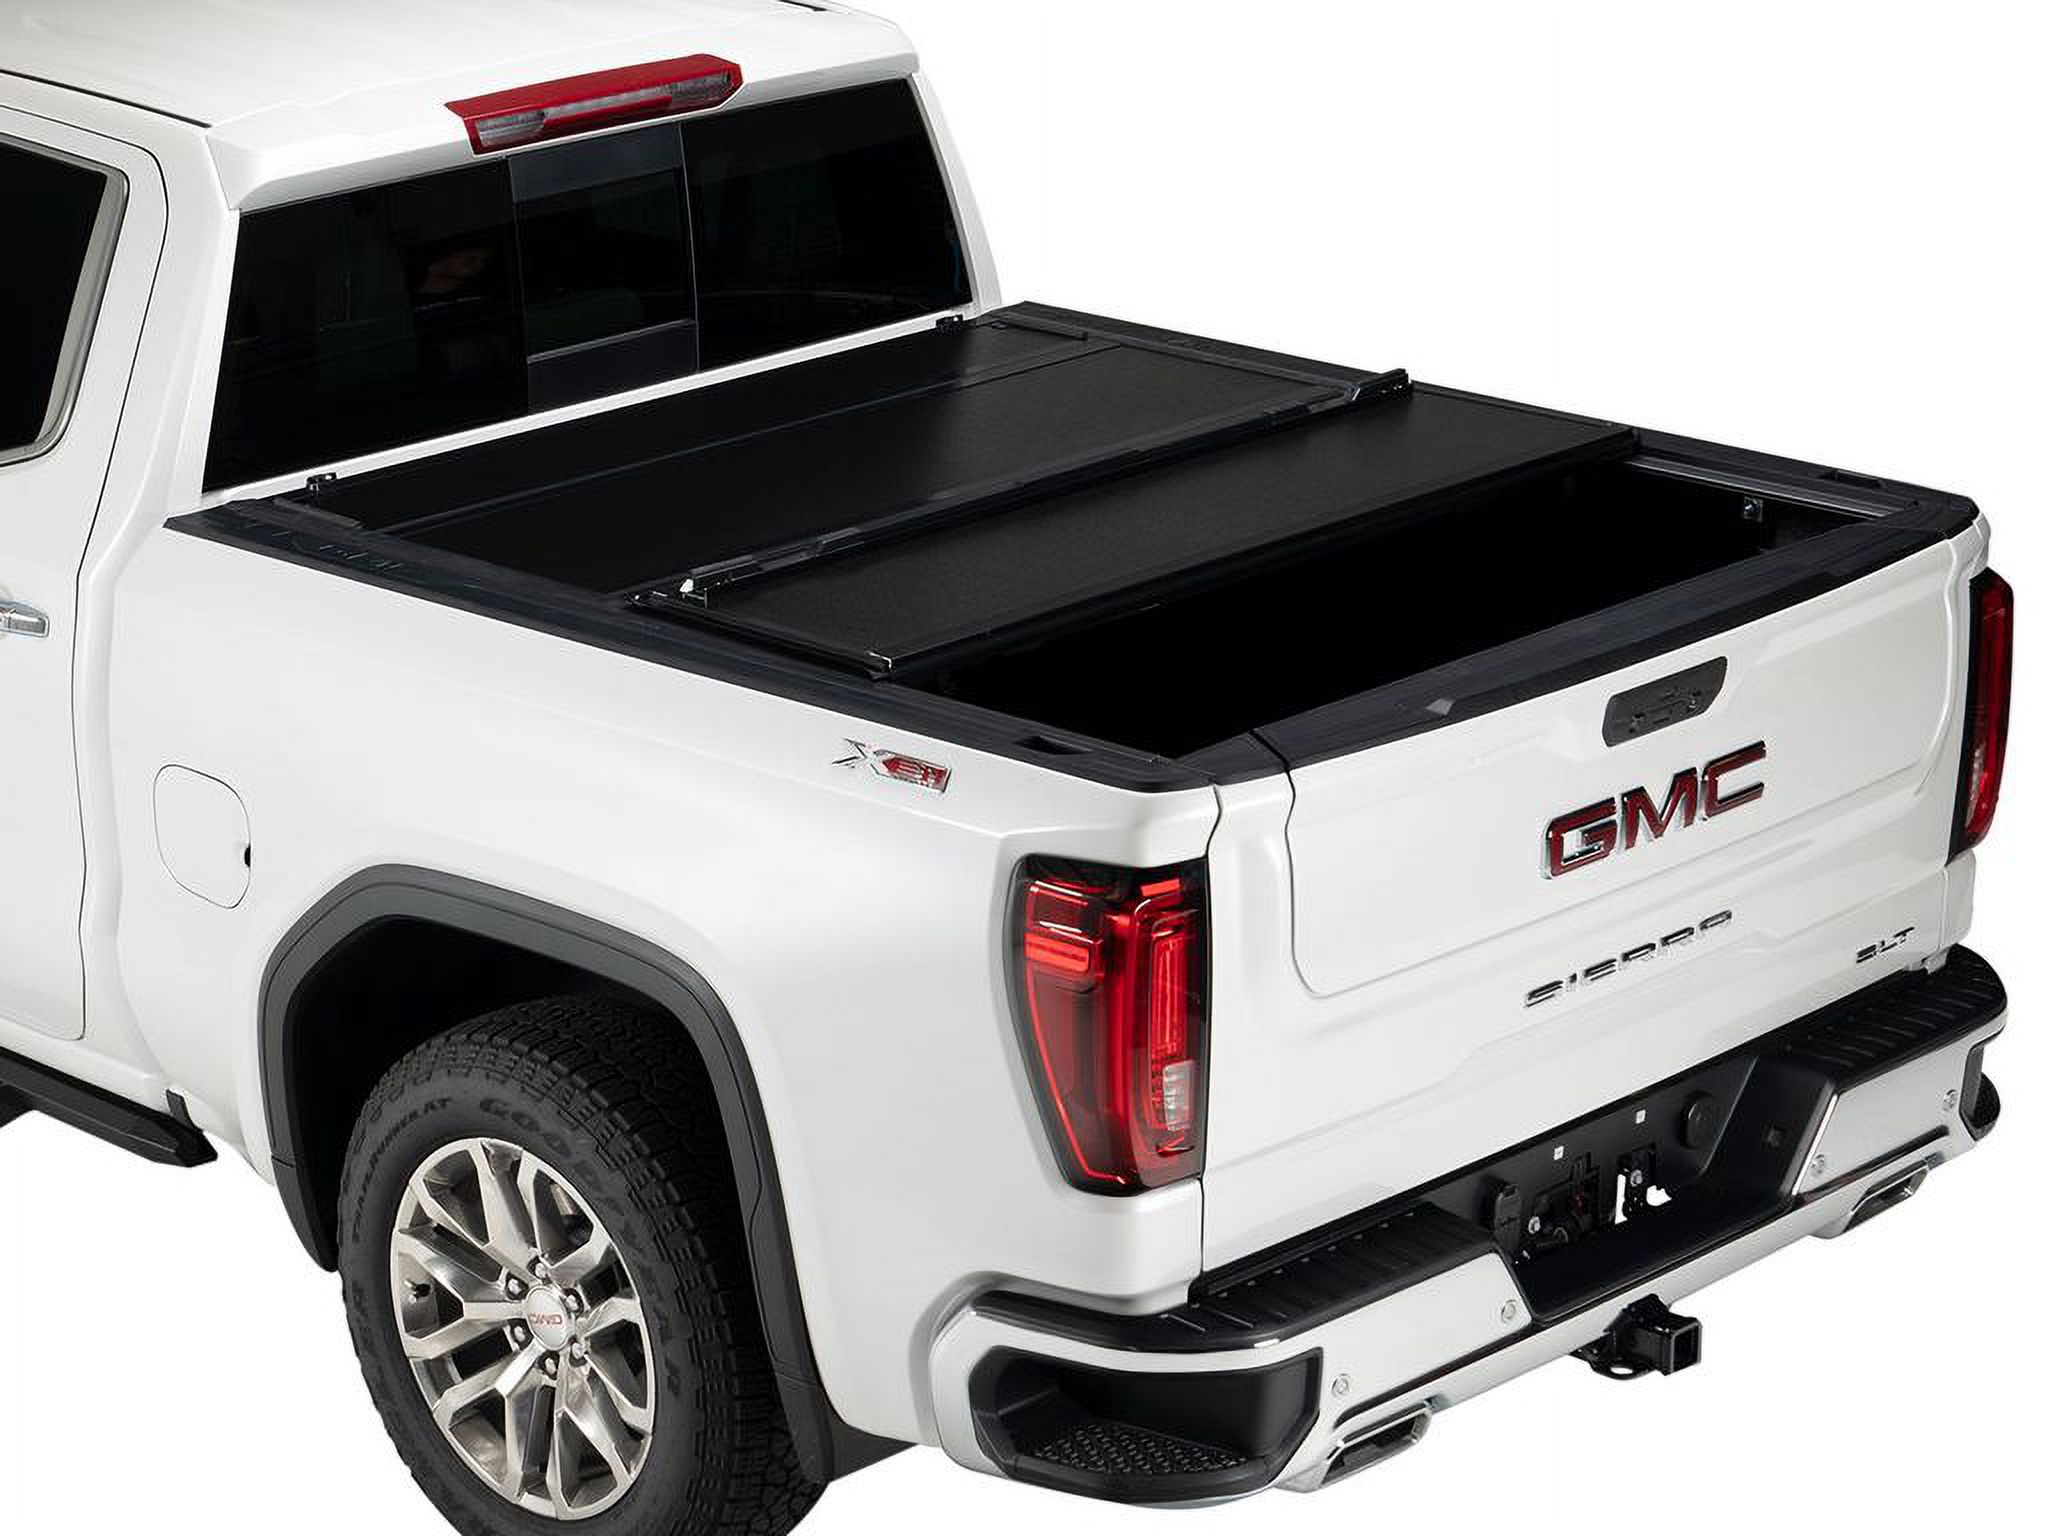 Gator by RealTruck FX Hard Folding Truck Bed Tonneau Cover | 8828409 | Compatible with 2007-2021 Toyota Tundra w/o Track System, Will Not Work With Trail Edition Models 5' 1" Bed (60.5") - image 1 of 9